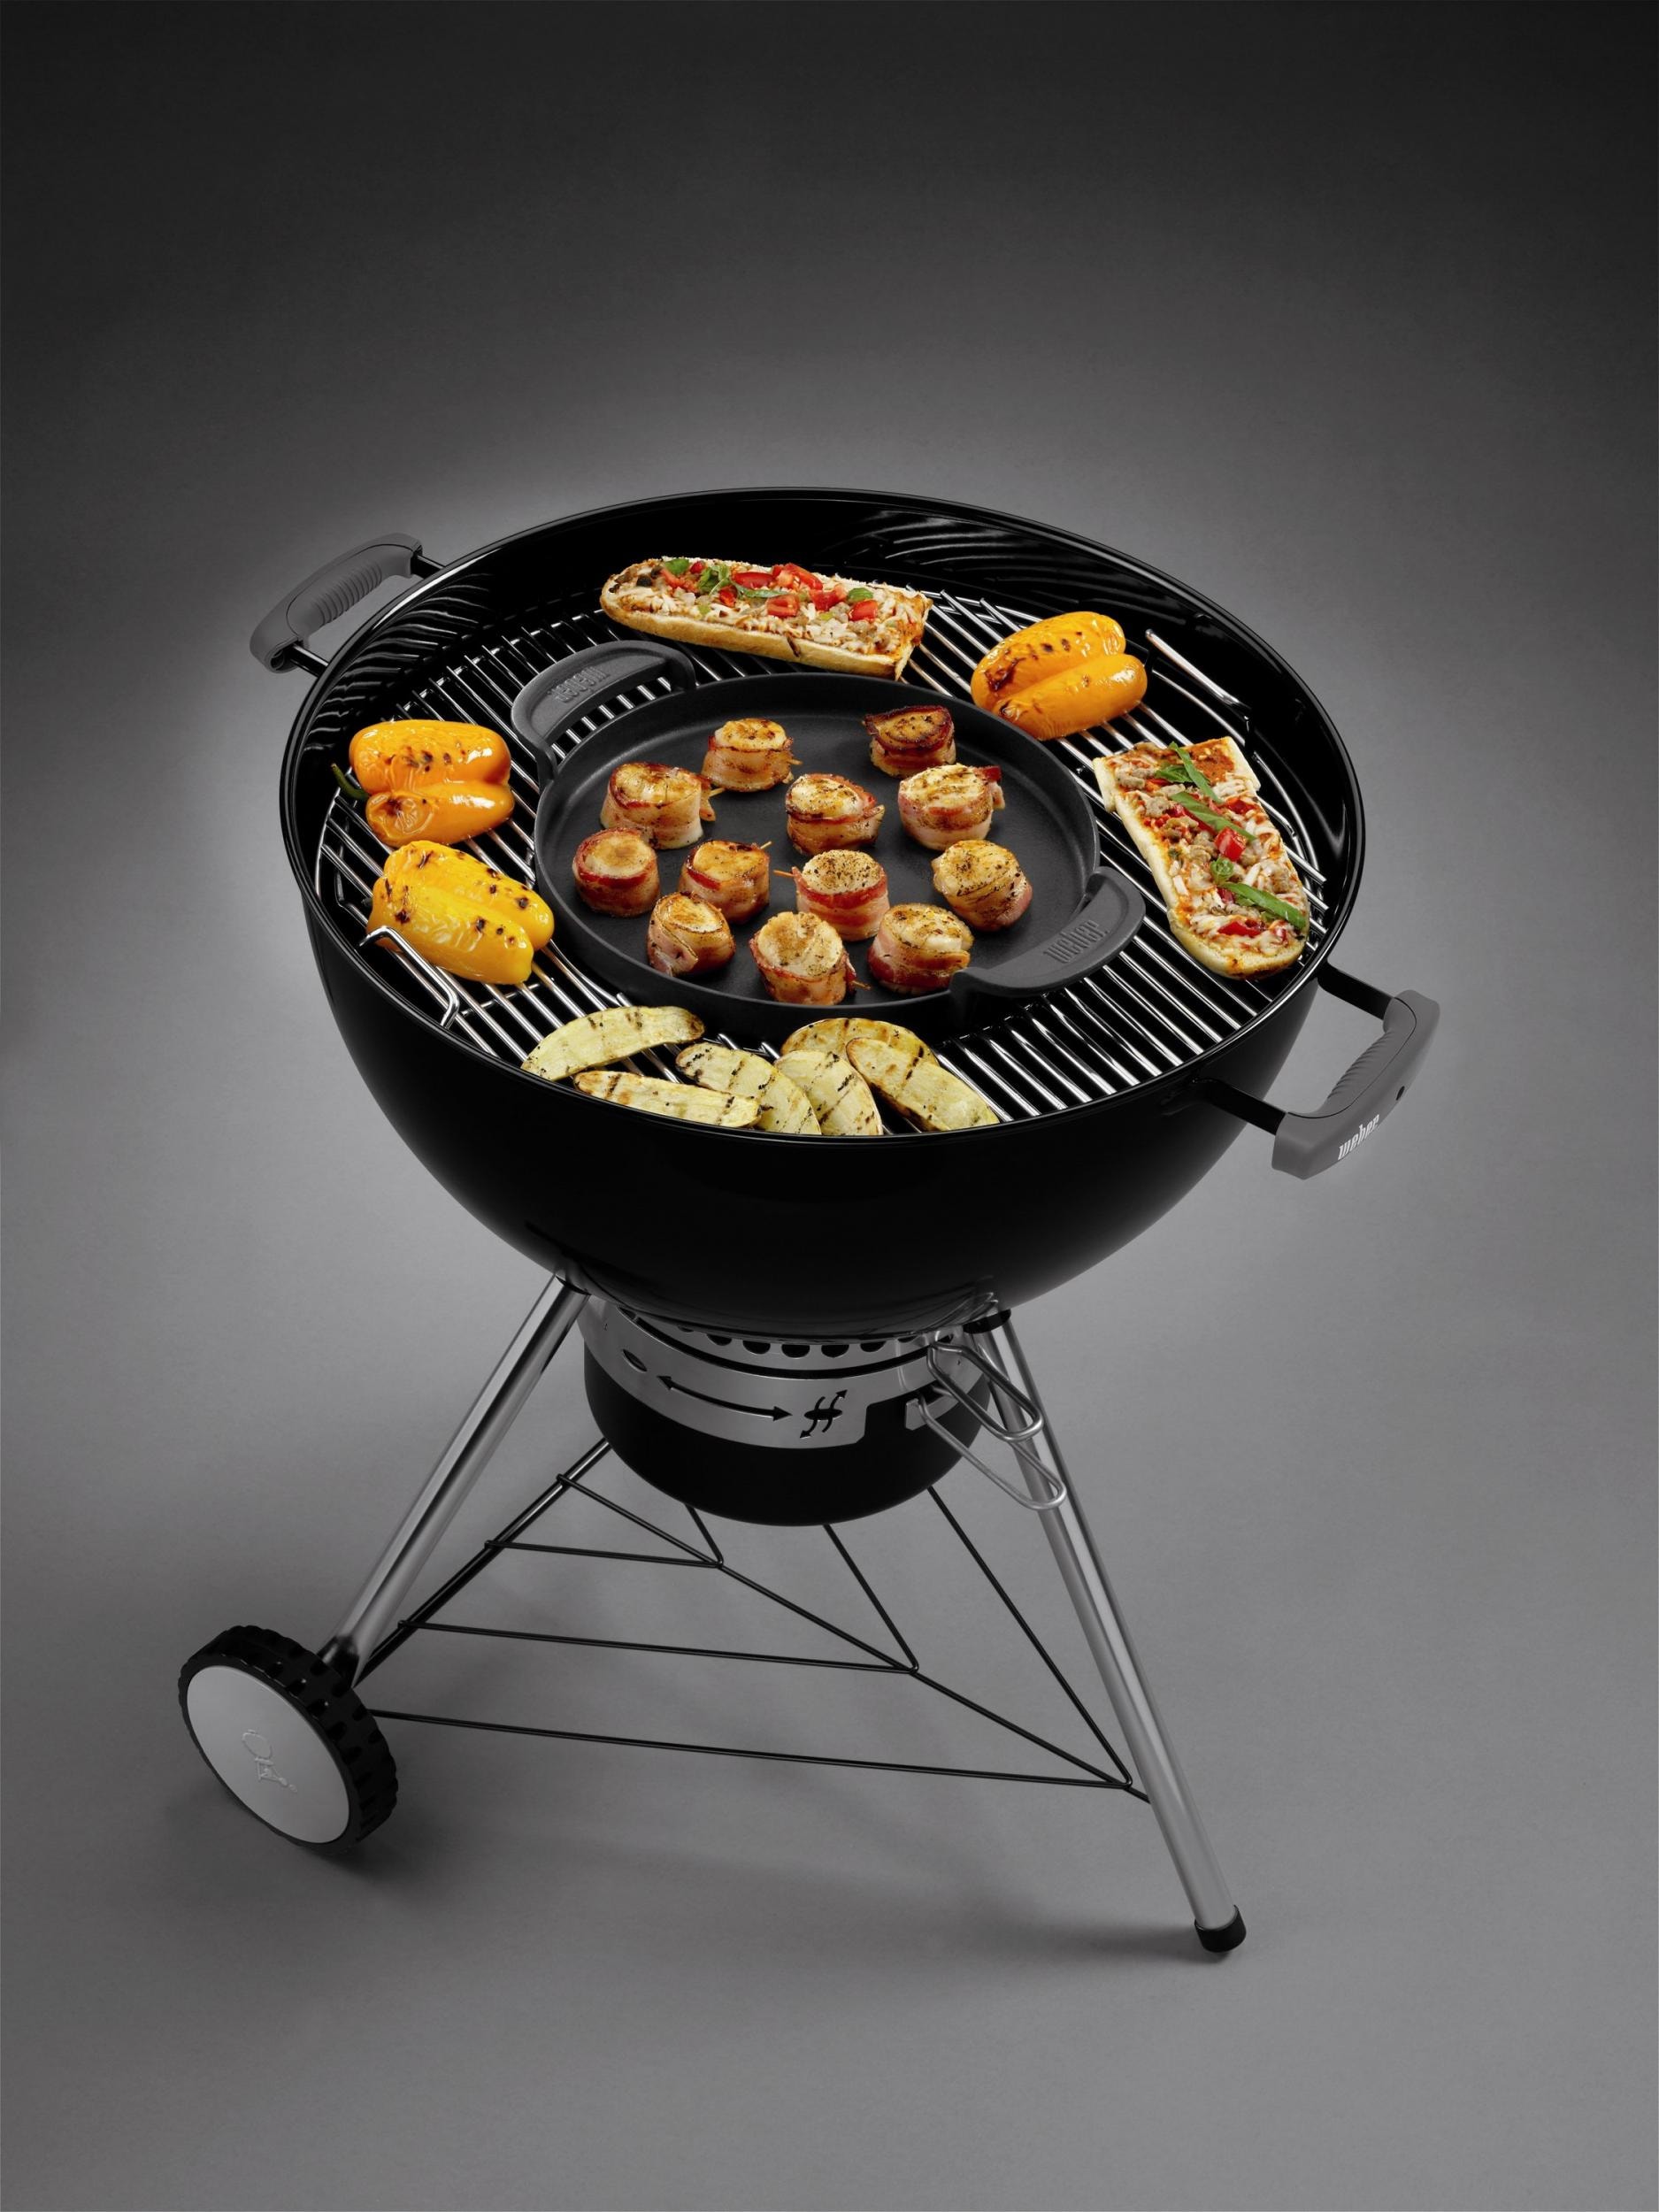 Plancha pour gourmet barbecue system - 7421 - WEBER